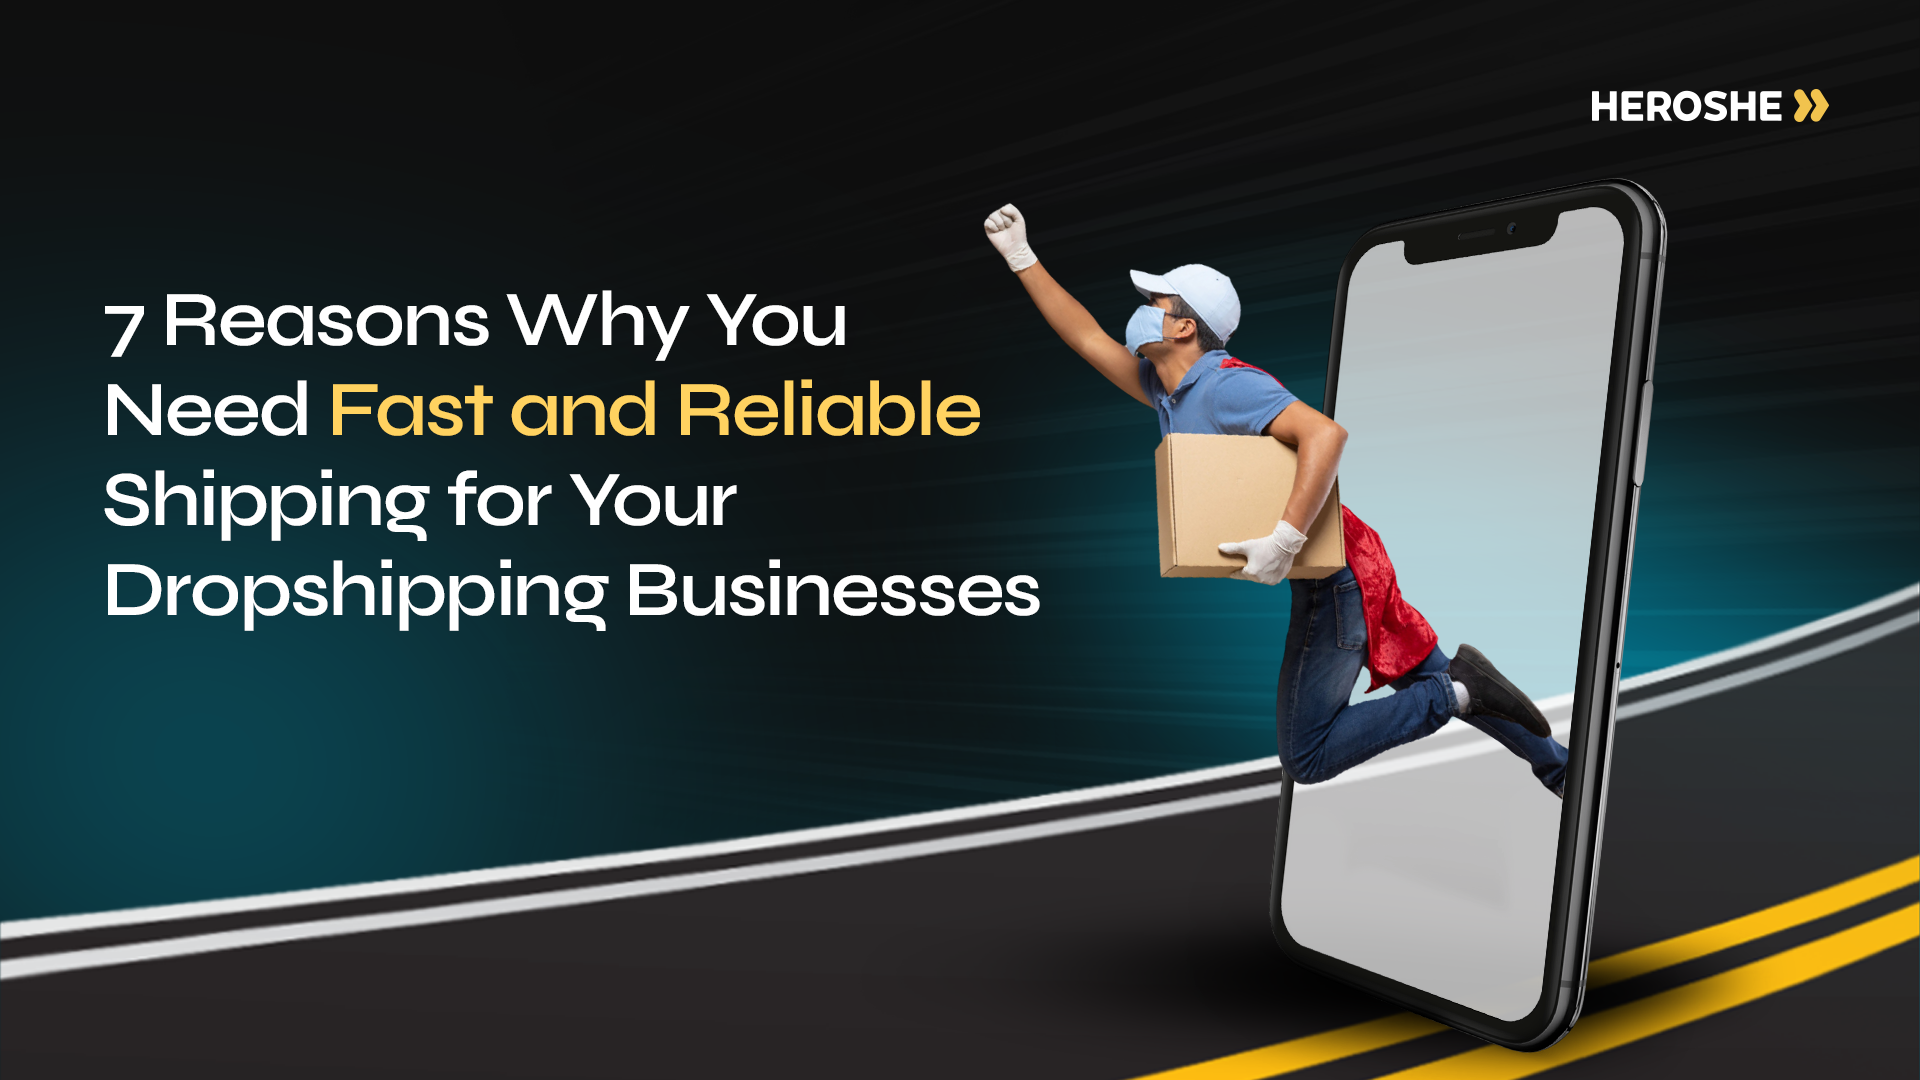 7 Reasons Why You Need Fast and Reliable Shipping for Your Dropshipping Businesses